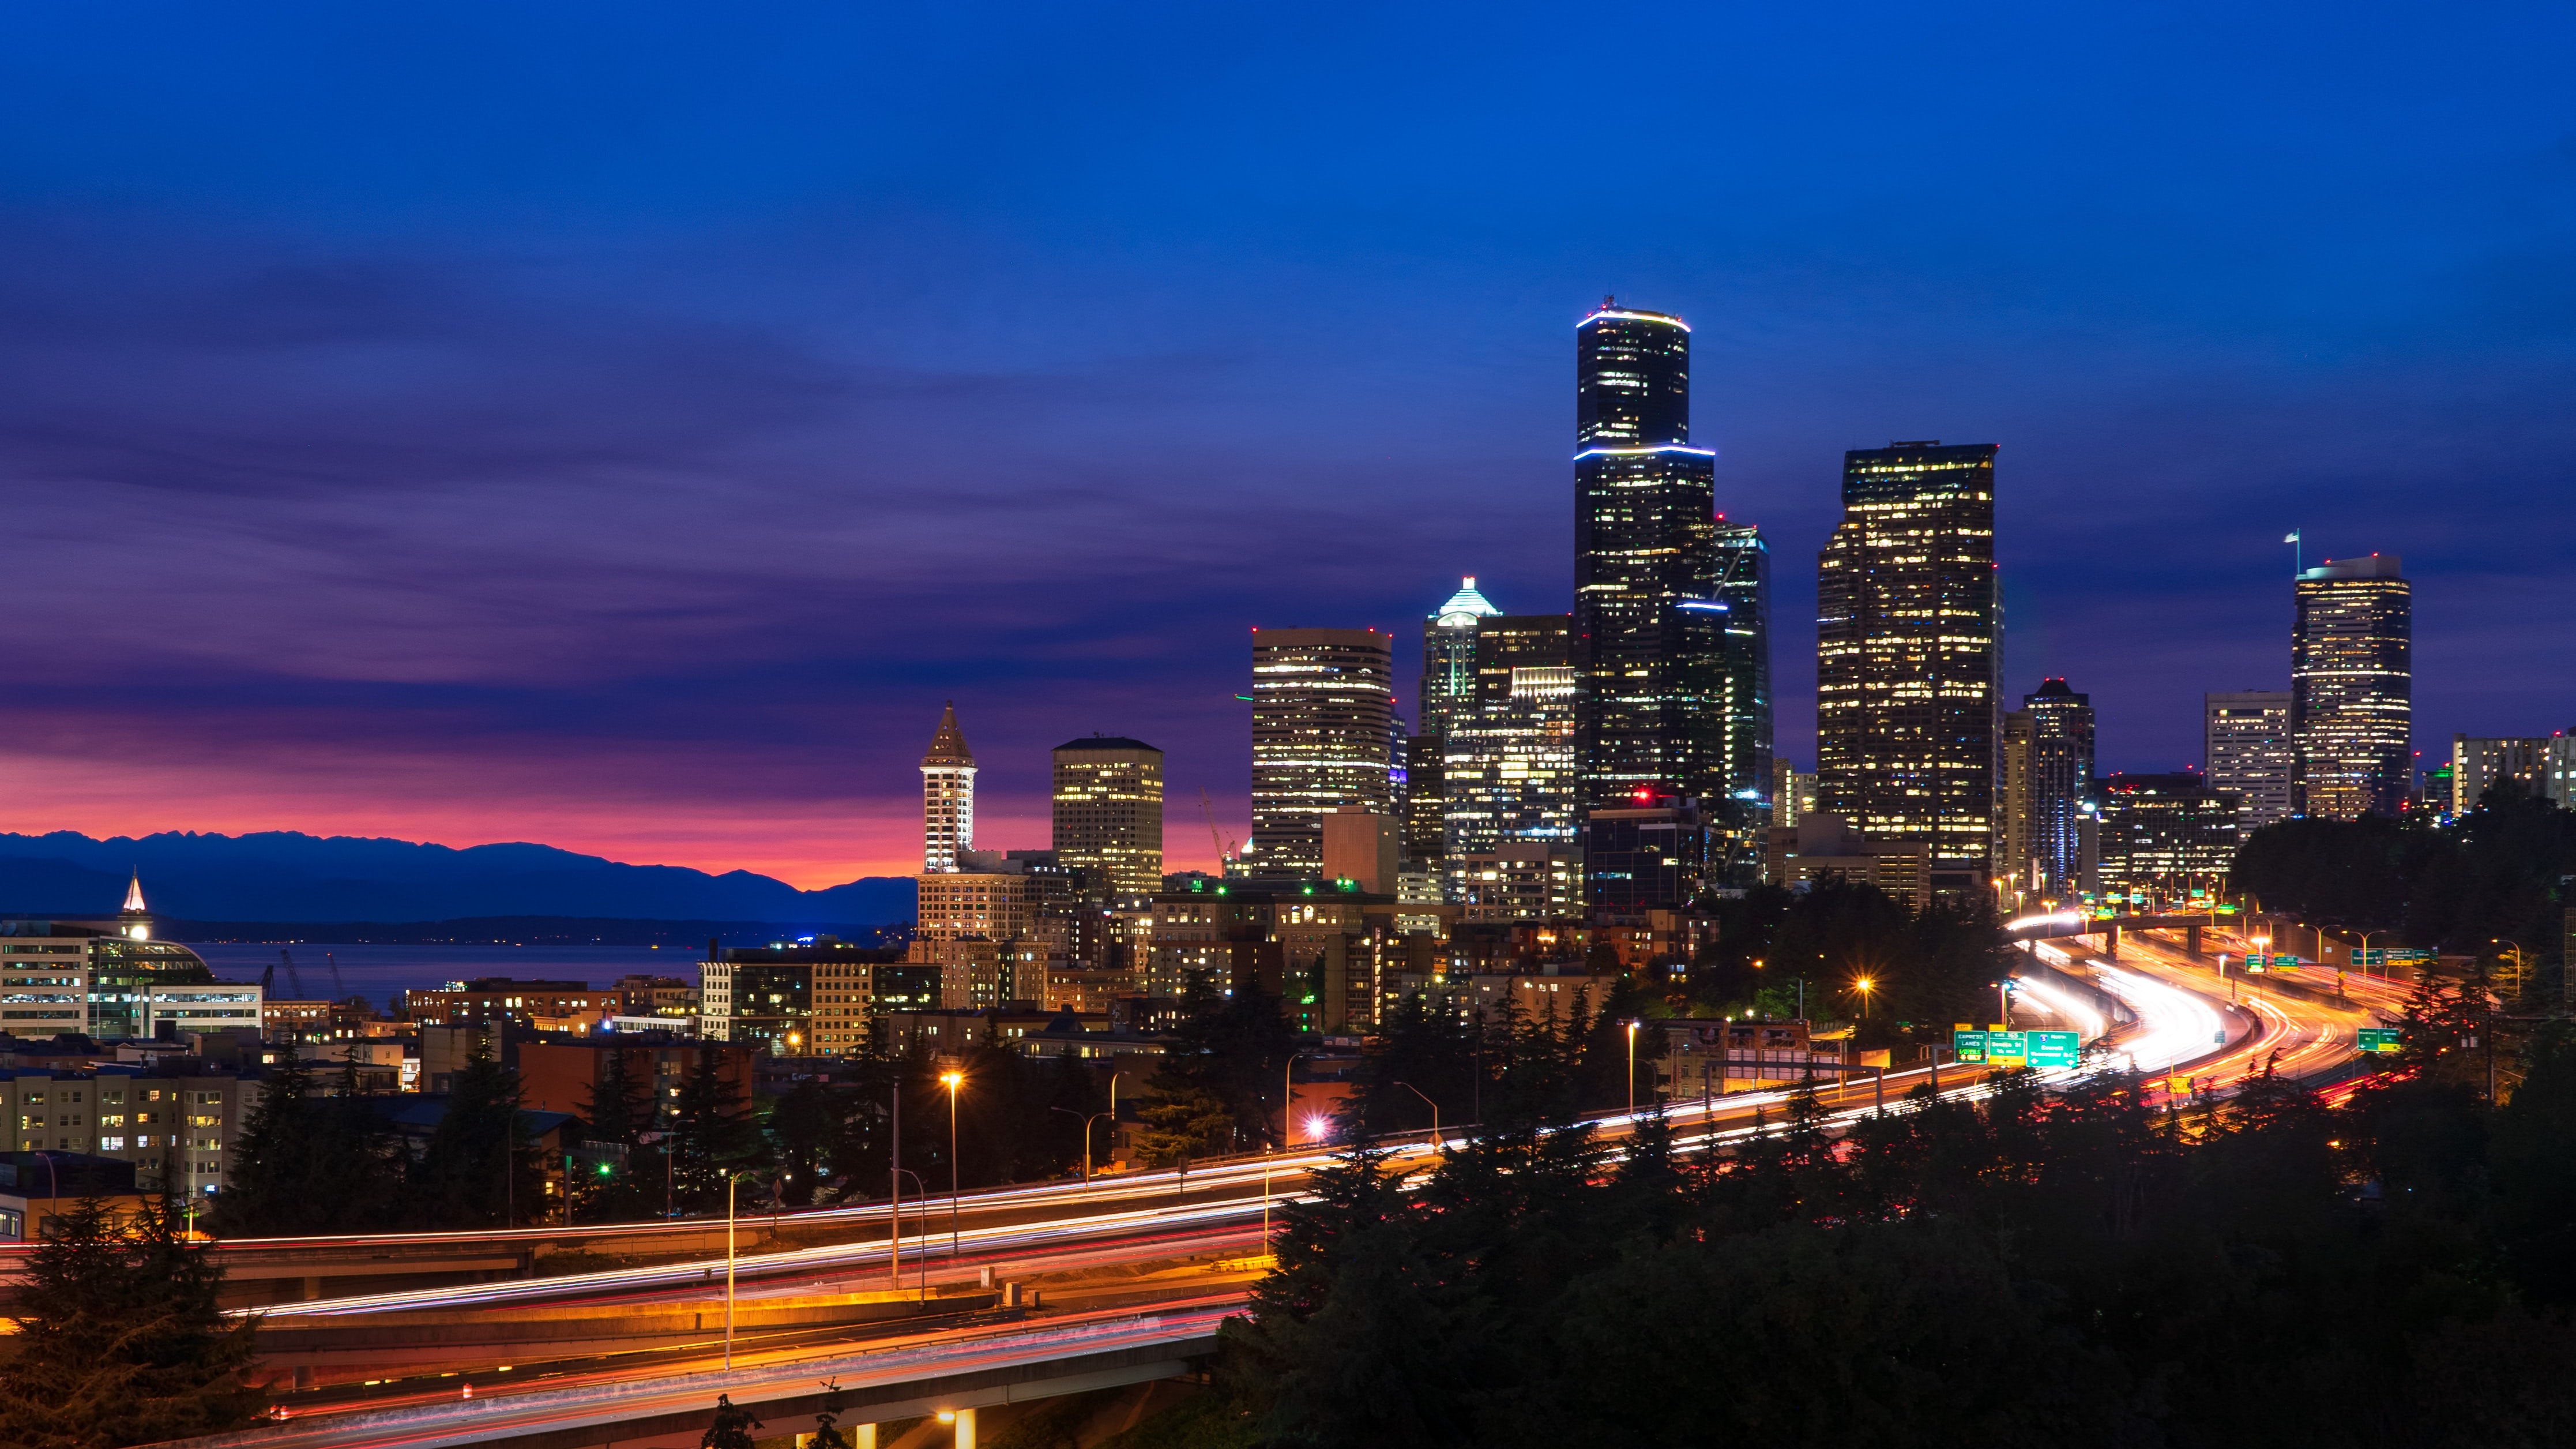 Seattle at night-time